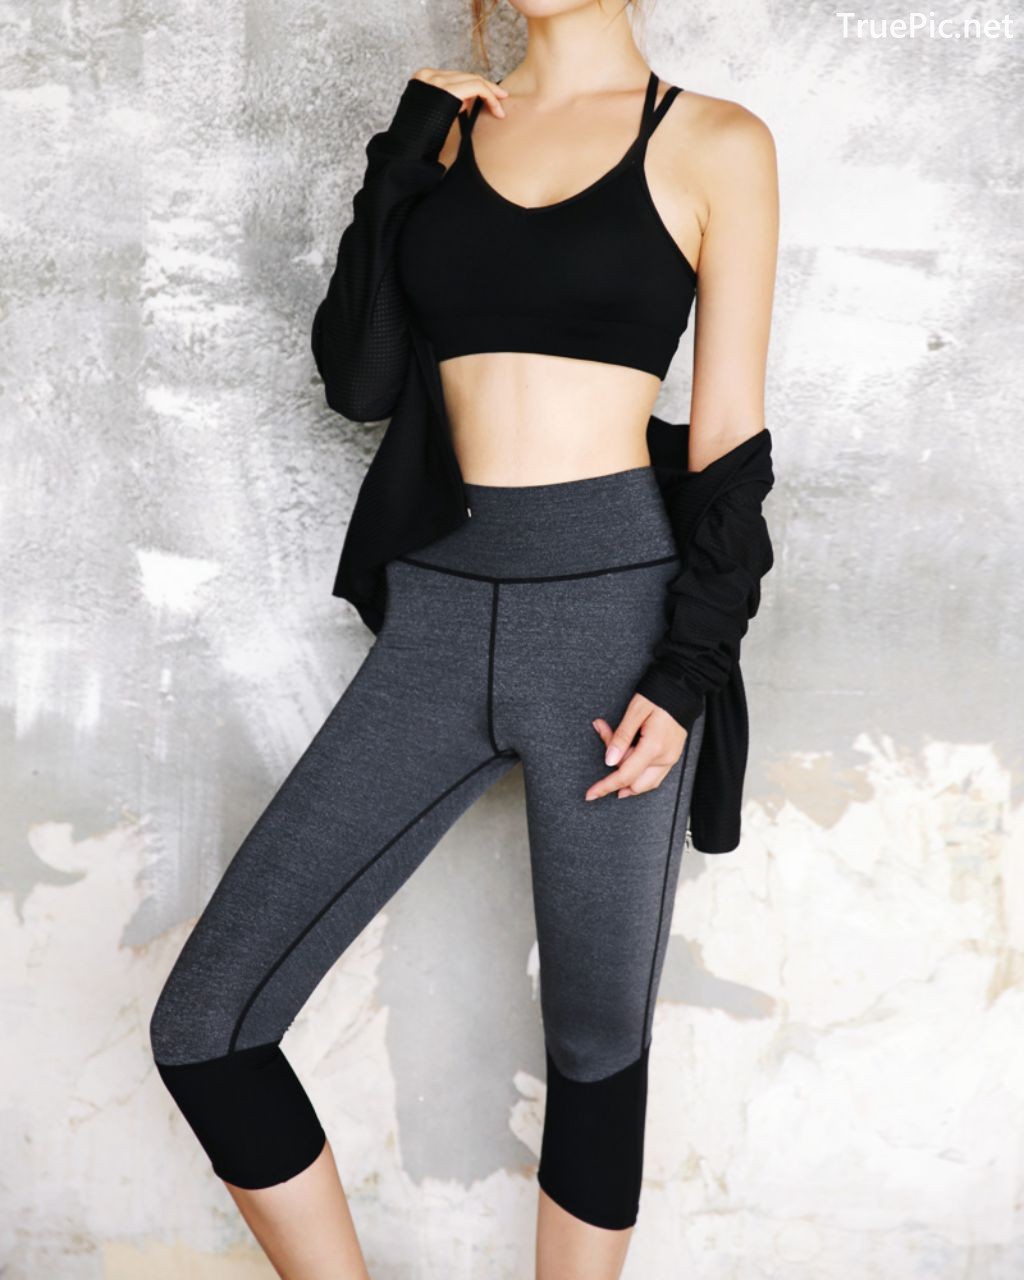 Image-Korean-Fashion-Model-Jin-Hee-Fitness-Set-Photoshoot-Collection-TruePic.net- Picture-30